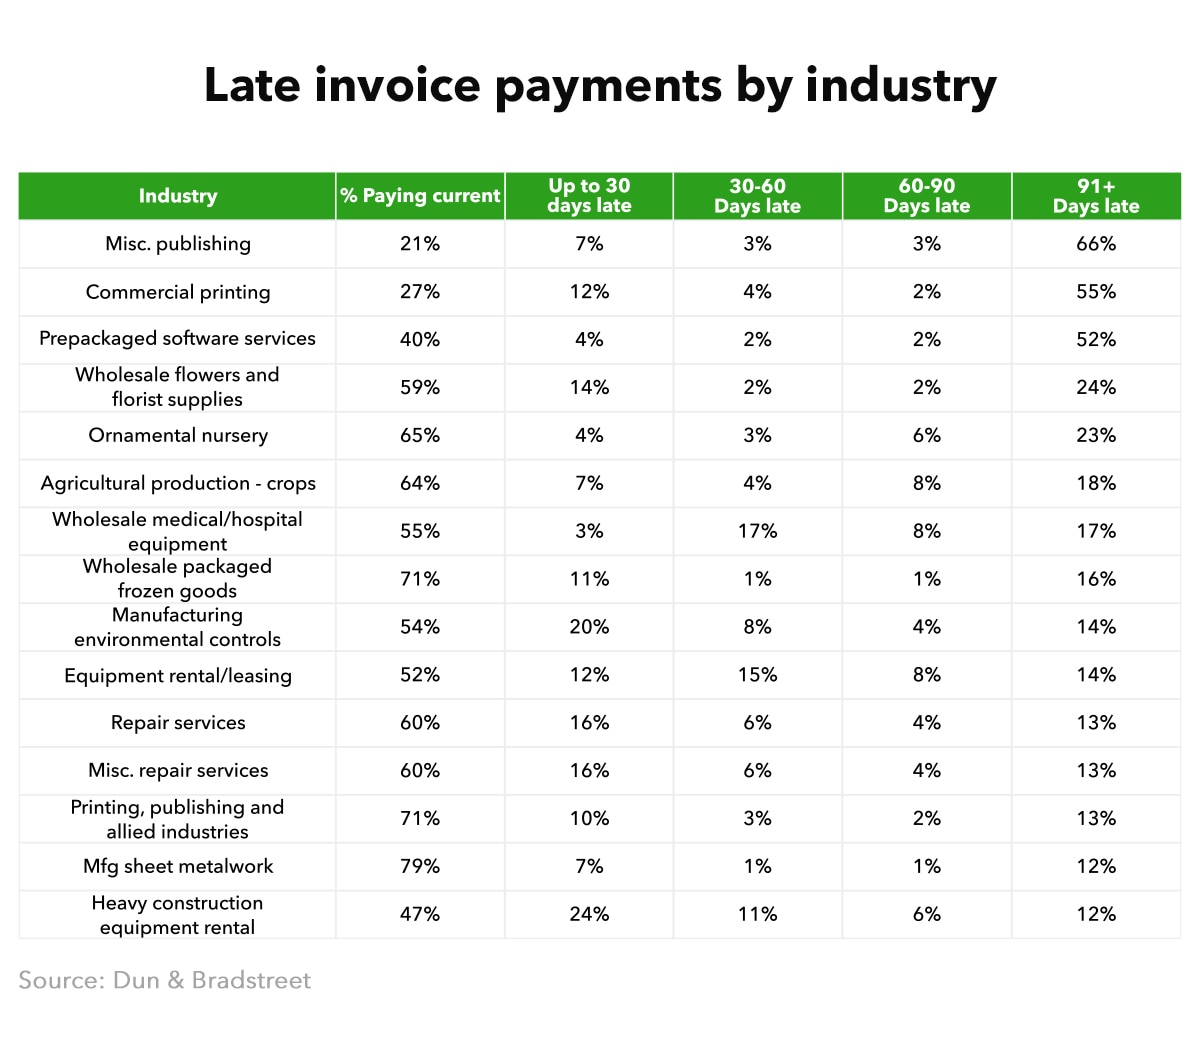 Late invoice payment statistics by industry